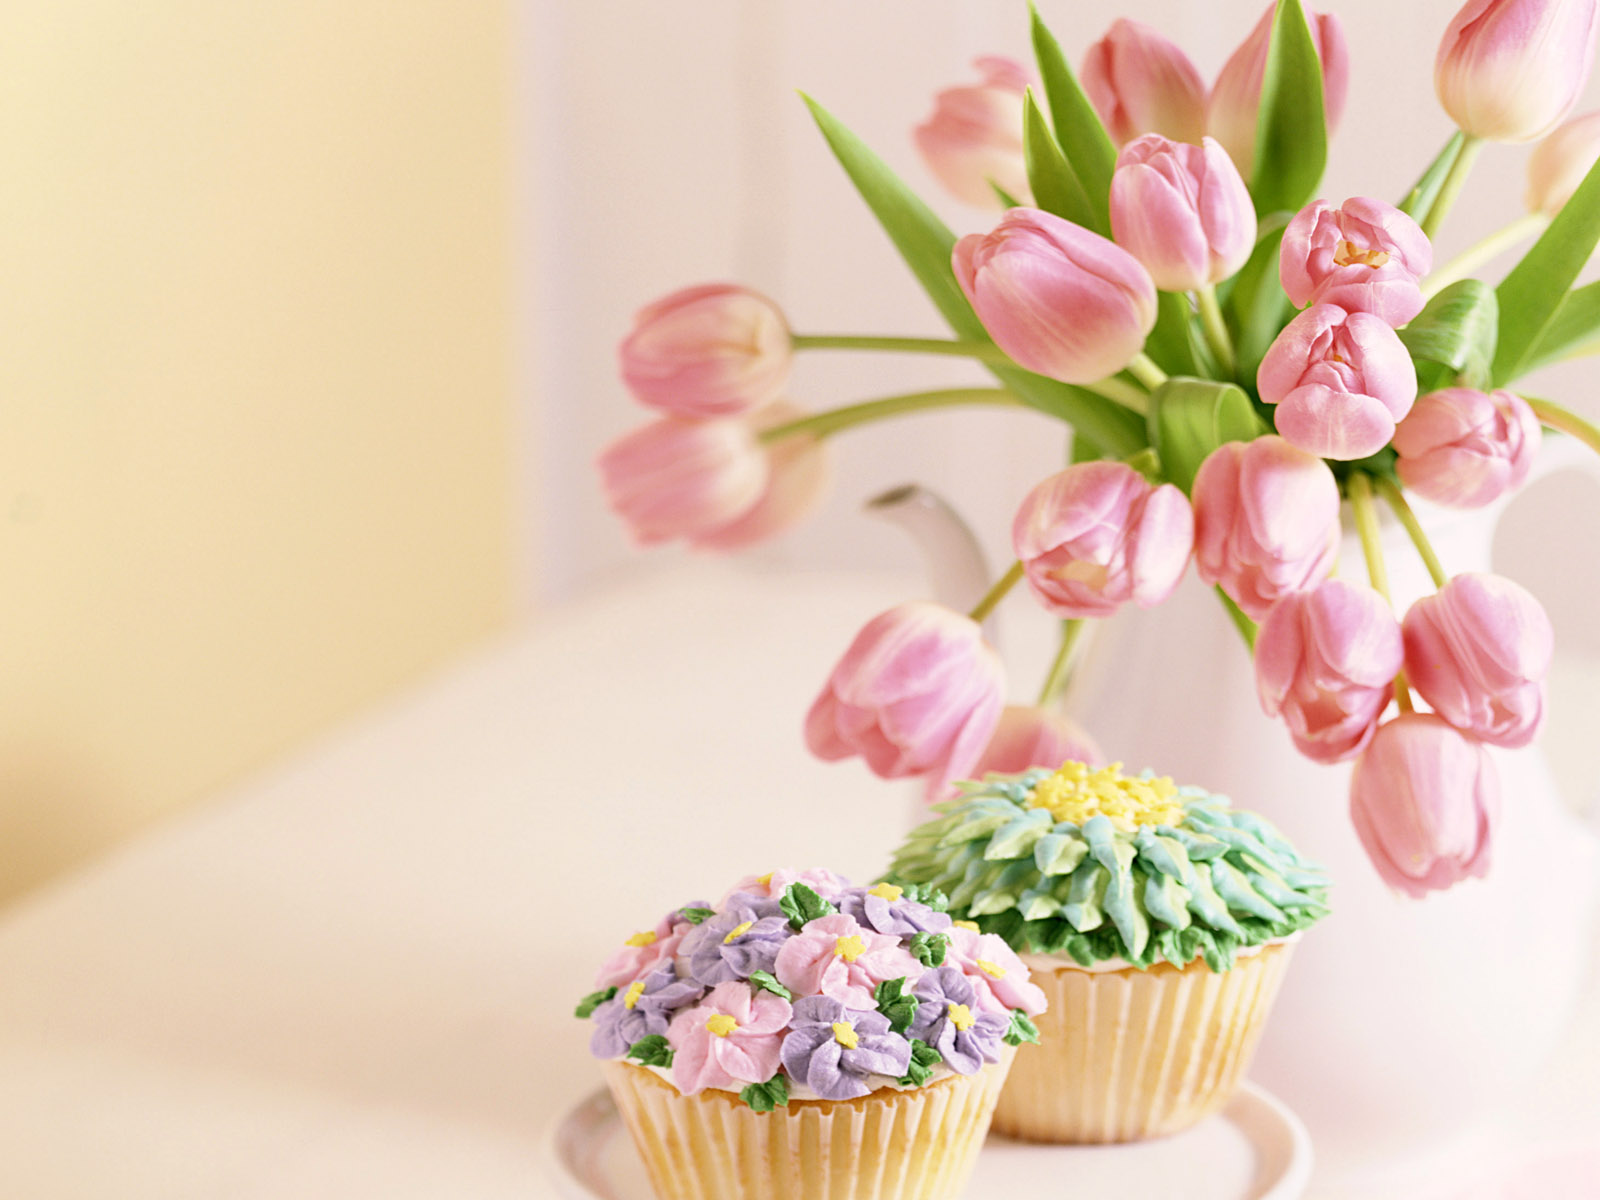 A delightful cake with colorful tulips on a vibrant desktop wallpaper.